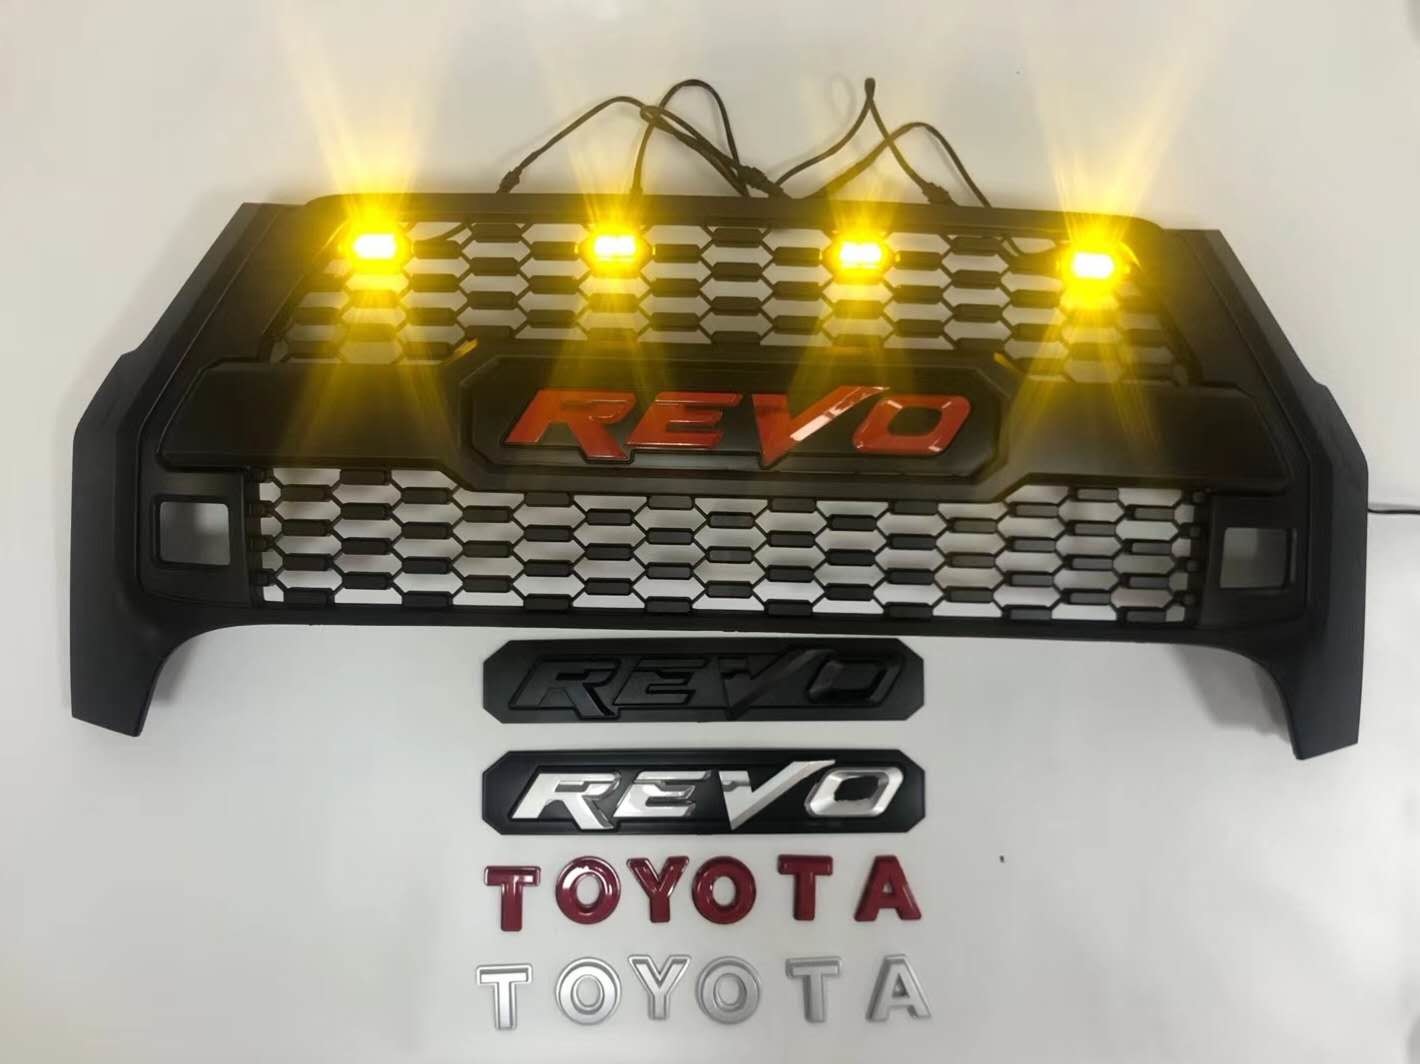 OEM Manufacturer Wholesale ABS Plastic Black Front Grill for Toyota Hilux Rocco Revo 2020 2021